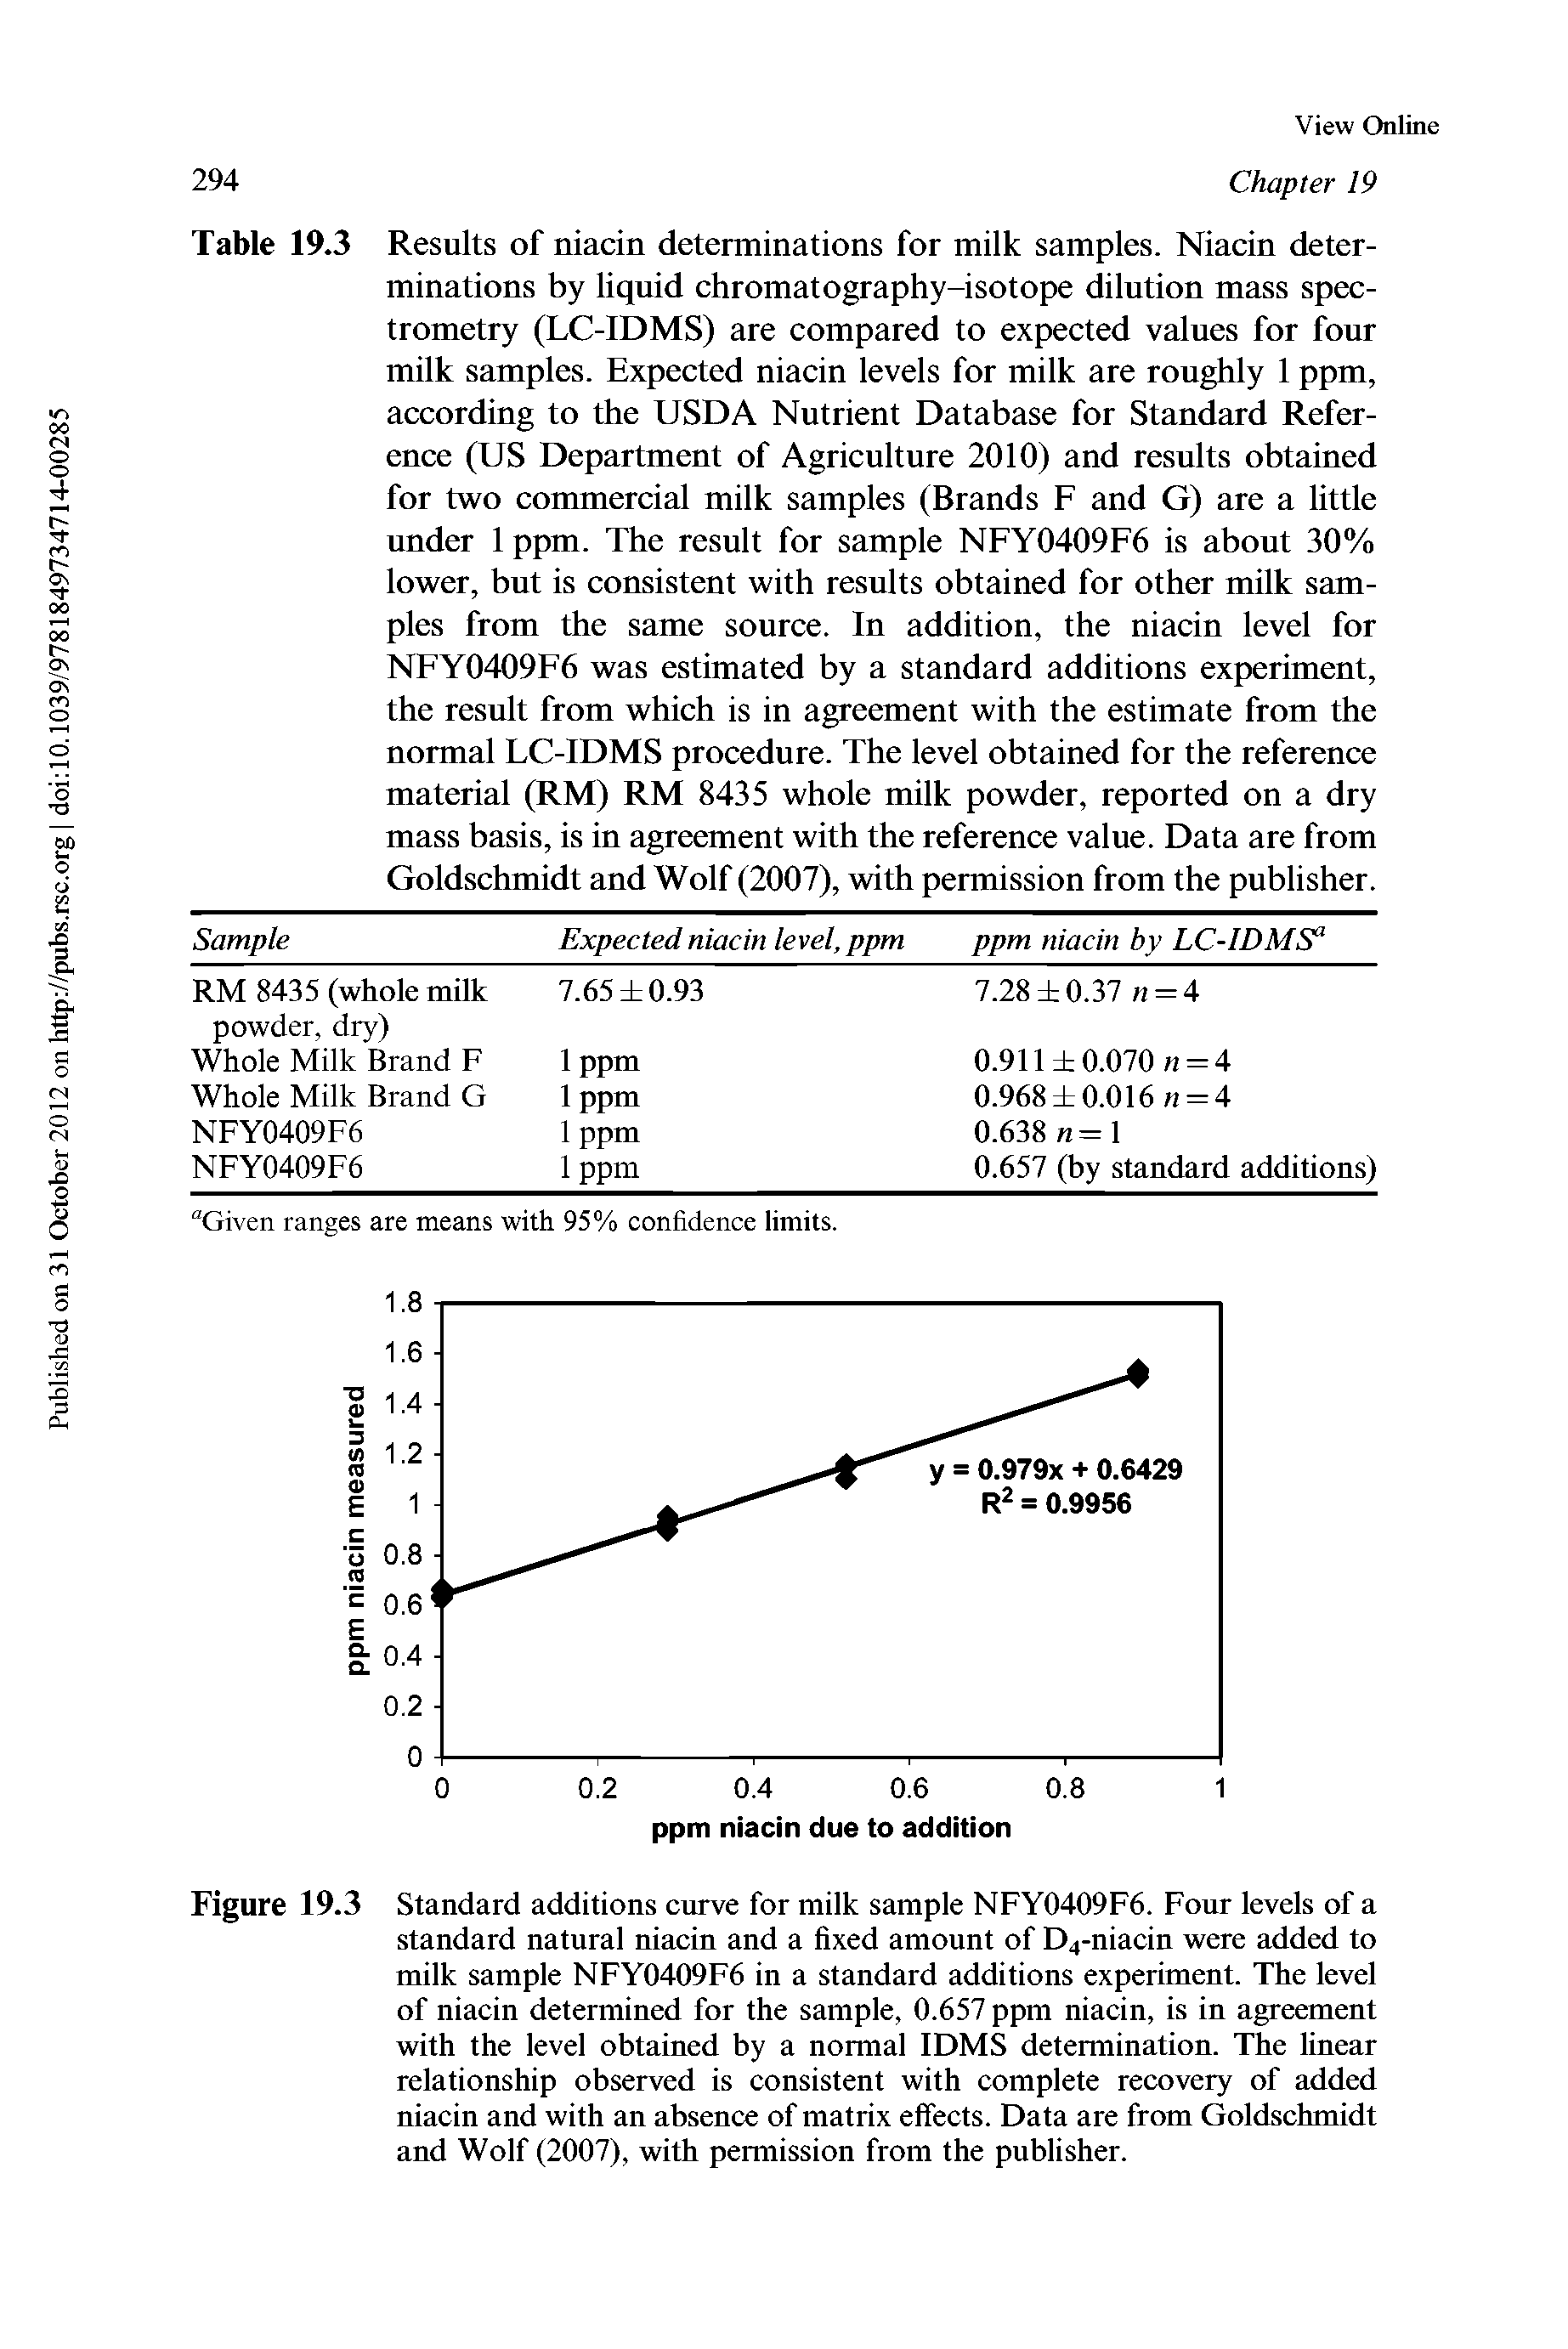 Table 19.3 Results of niacin determinations for milk samples. Niacin determinations by liquid chromatography-isotope dilution mass spectrometry (LC-IDMS) are compared to expected values for four milk samples. Expected niacin levels for milk are roughly 1 ppm, according to the USDA Nutrient Database for Standard Reference (US Department of Agriculture 2010) and results obtained for two commercial milk samples (Brands F and G) are a little under 1 ppm. The result for sample NFY0409F6 is about 30% lower, but is consistent with results obtained for other milk samples from the same source. In addition, the niaein level for NFY0409F6 was estimated by a standard additions experiment, the result from which is in agreement with the estimate from the normal LC-IDMS procedure. The level obtained for the reference material (RM) RM 8435 whole milk powder, reported on a dry mass basis, is in agreement with the reference value. Data are from Goldschmidt and Wolf (2007), with permission from the publisher.